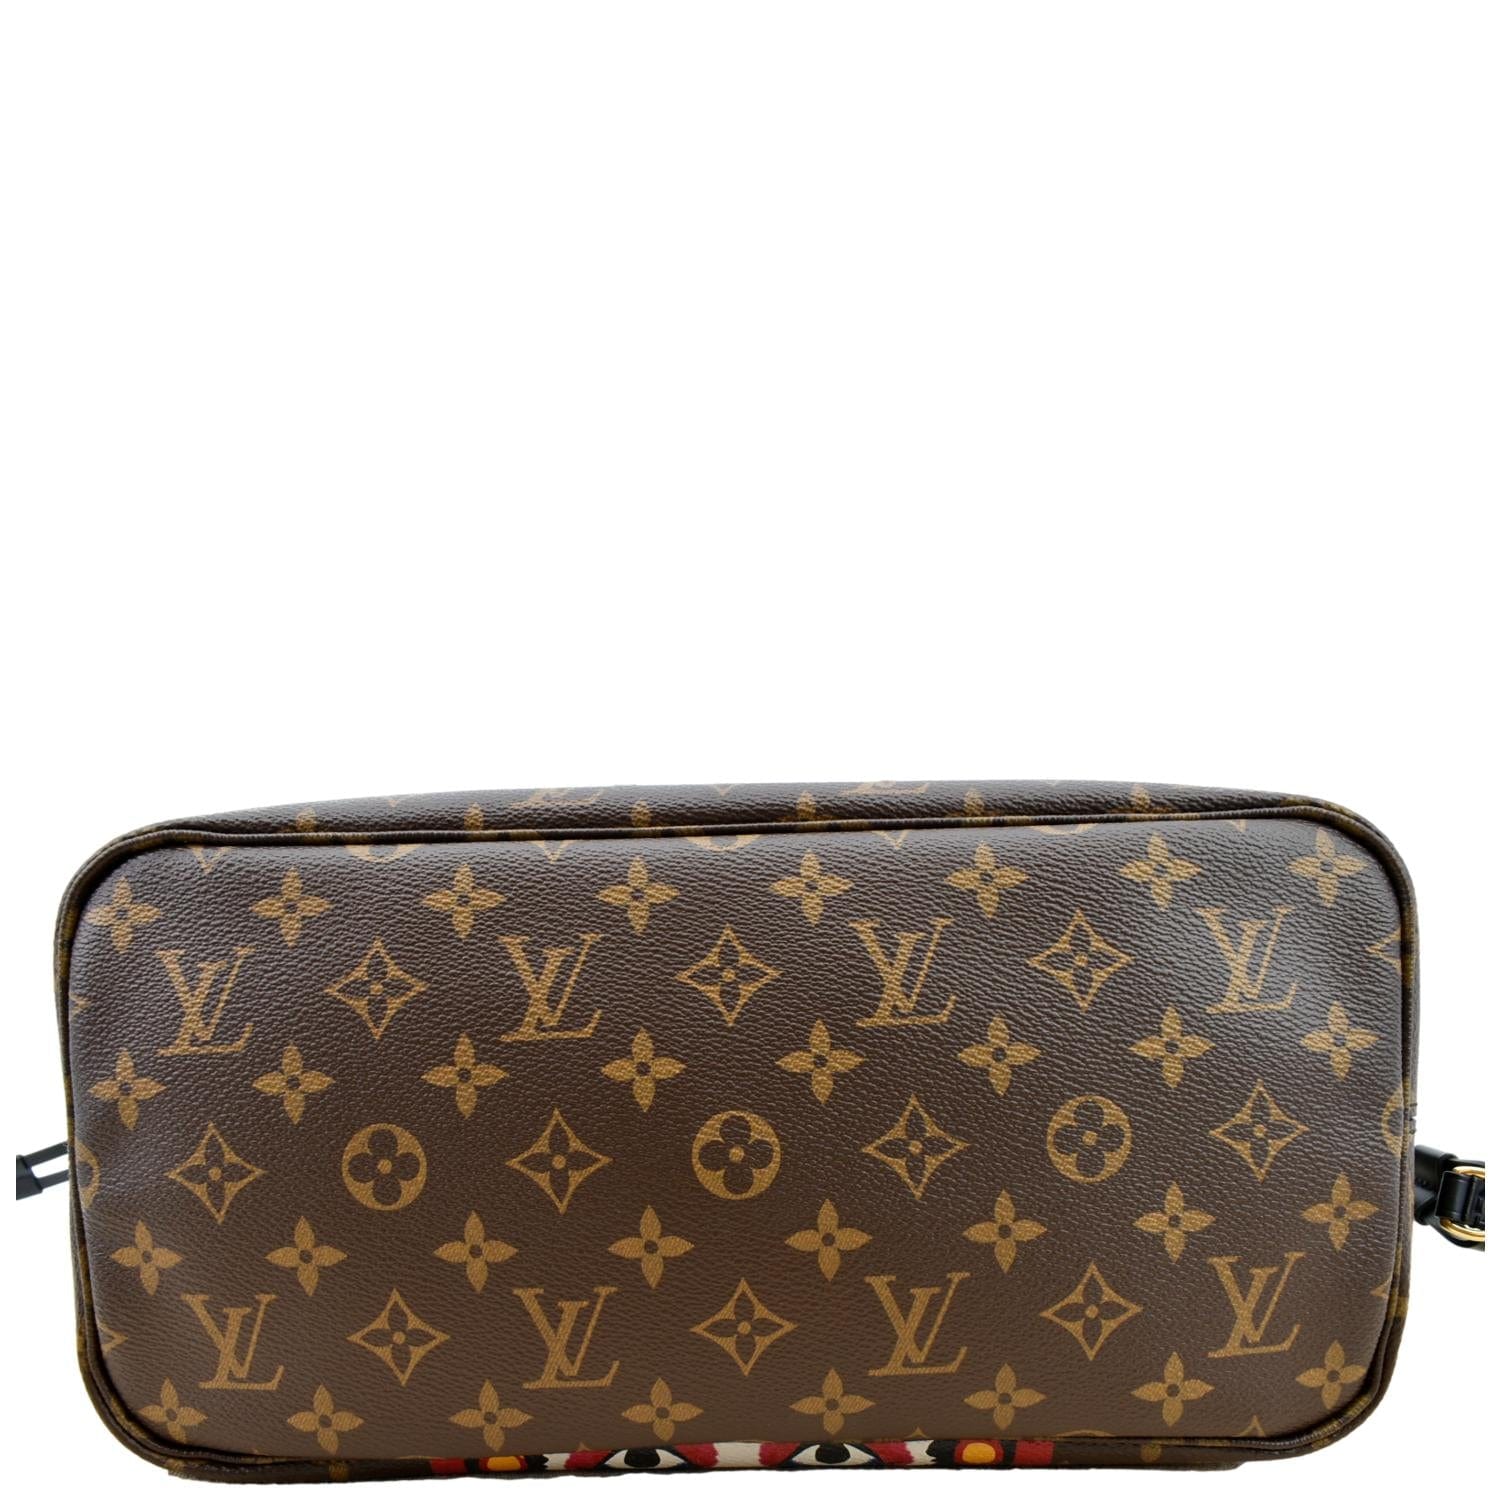 Louis Vuitton x Kabuki Pre-owned Neverfull mm Tote Bag - Brown